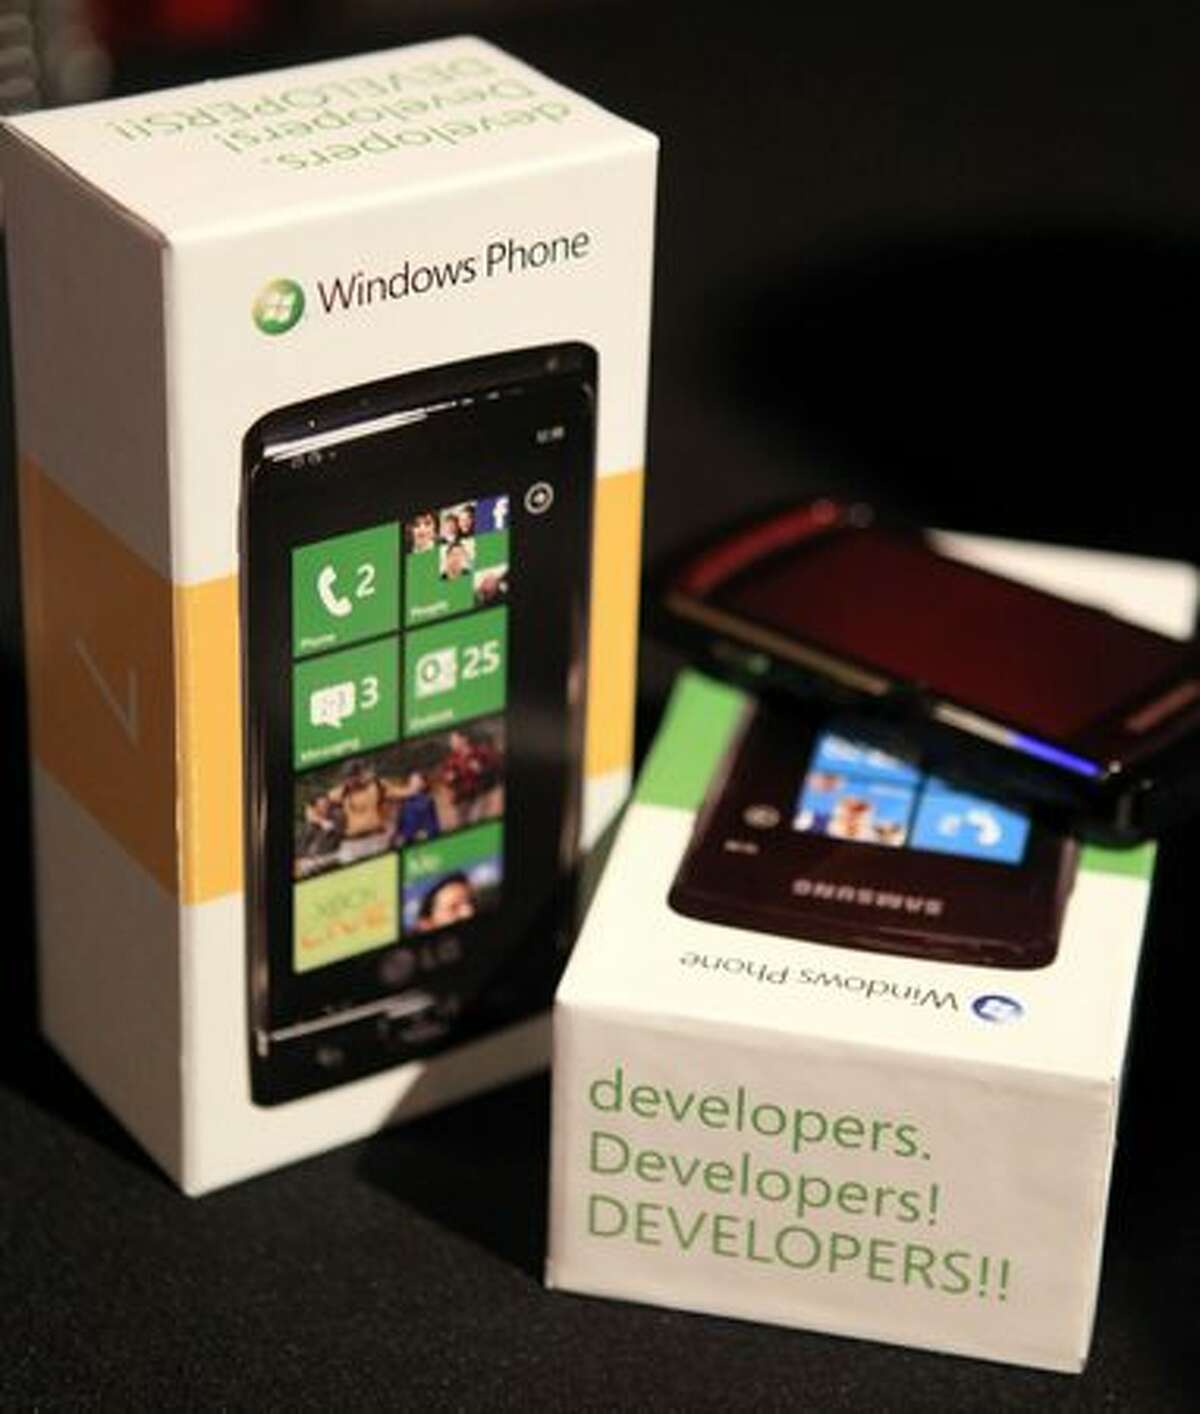 A Windows Phone 7 devices is shown Tuesday during the "gdgt live" event at the Showbox SoDo in Seattle.